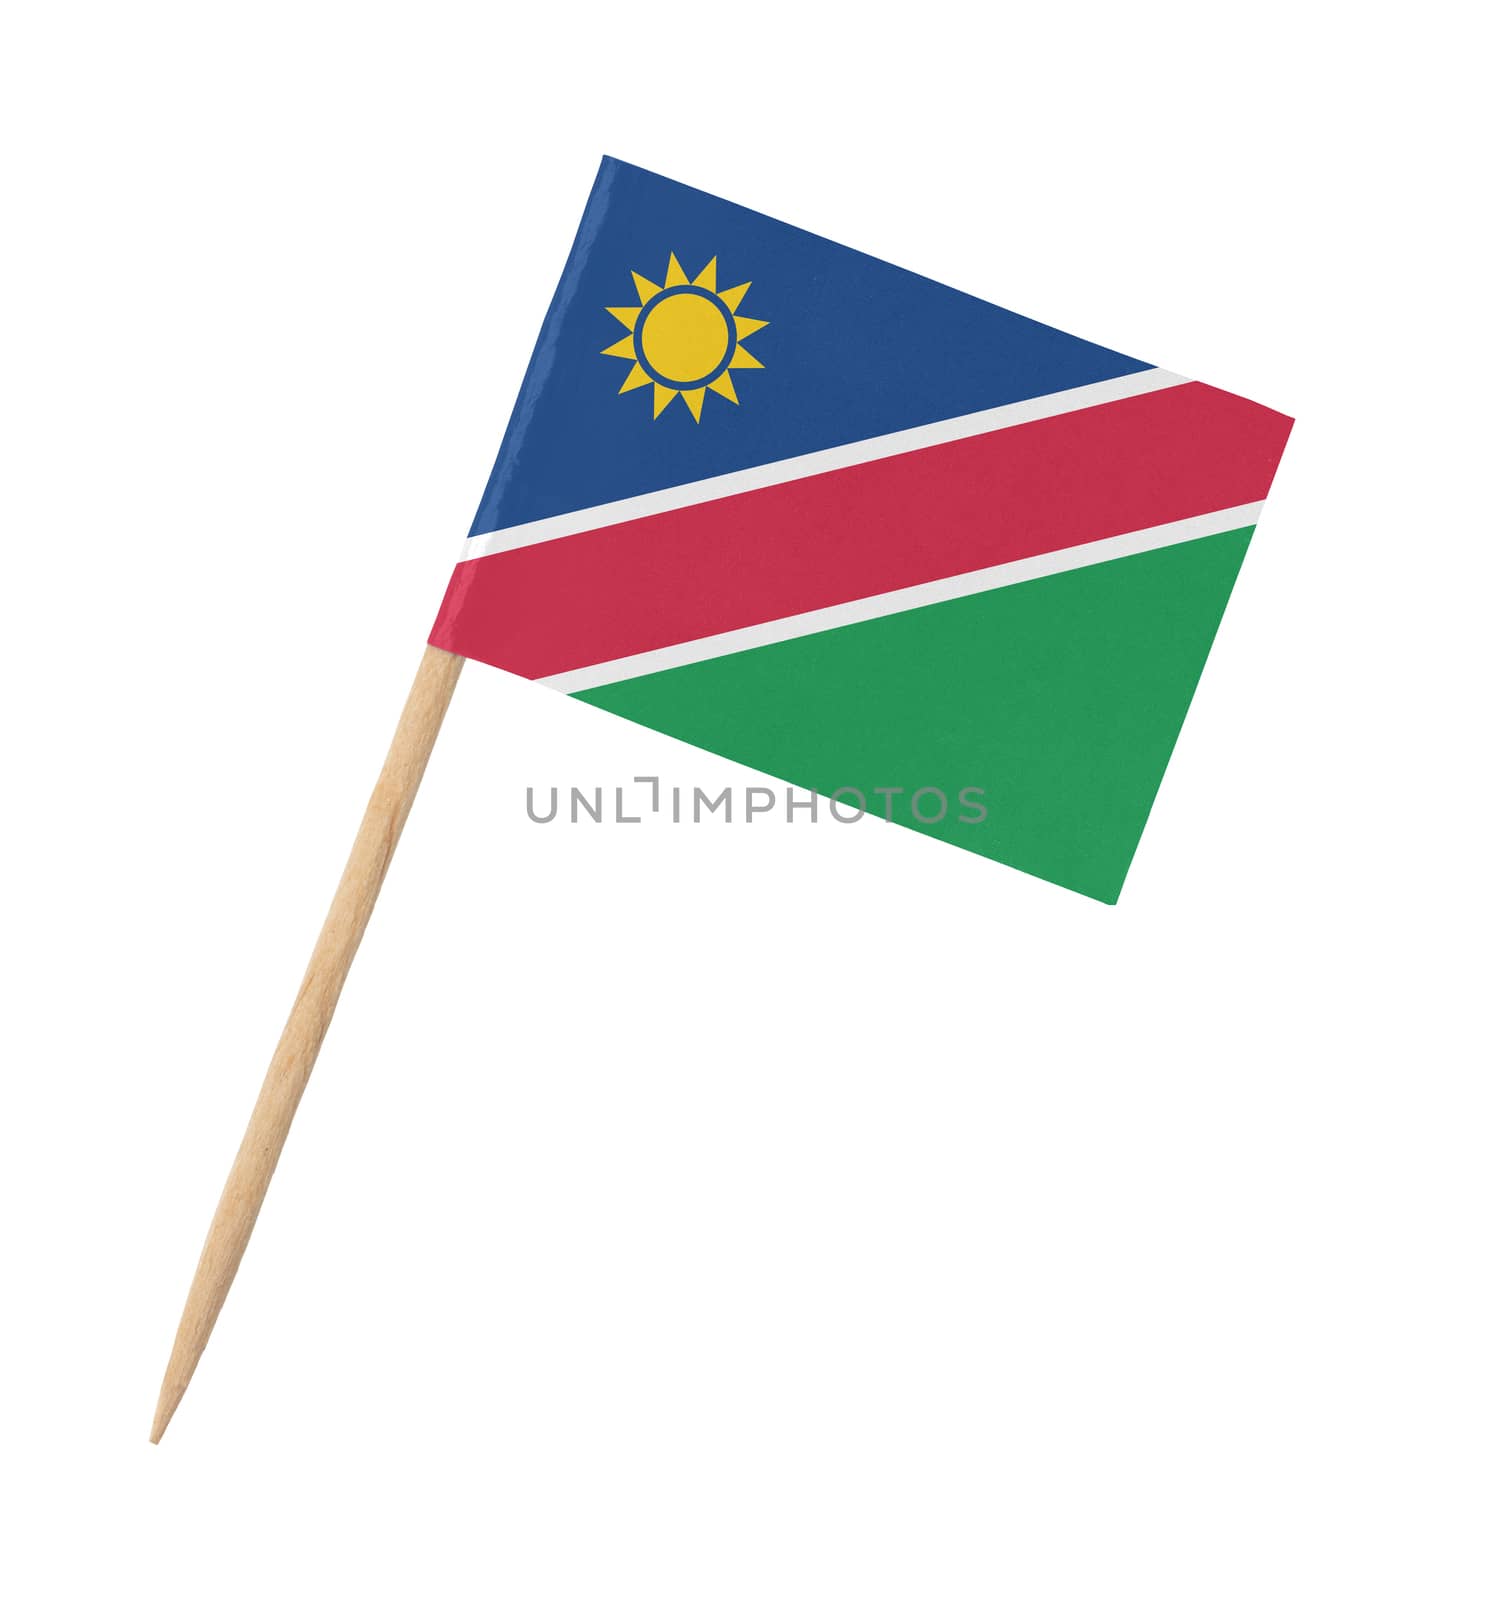 Small paper flag of Namibia on wooden stick by michaklootwijk